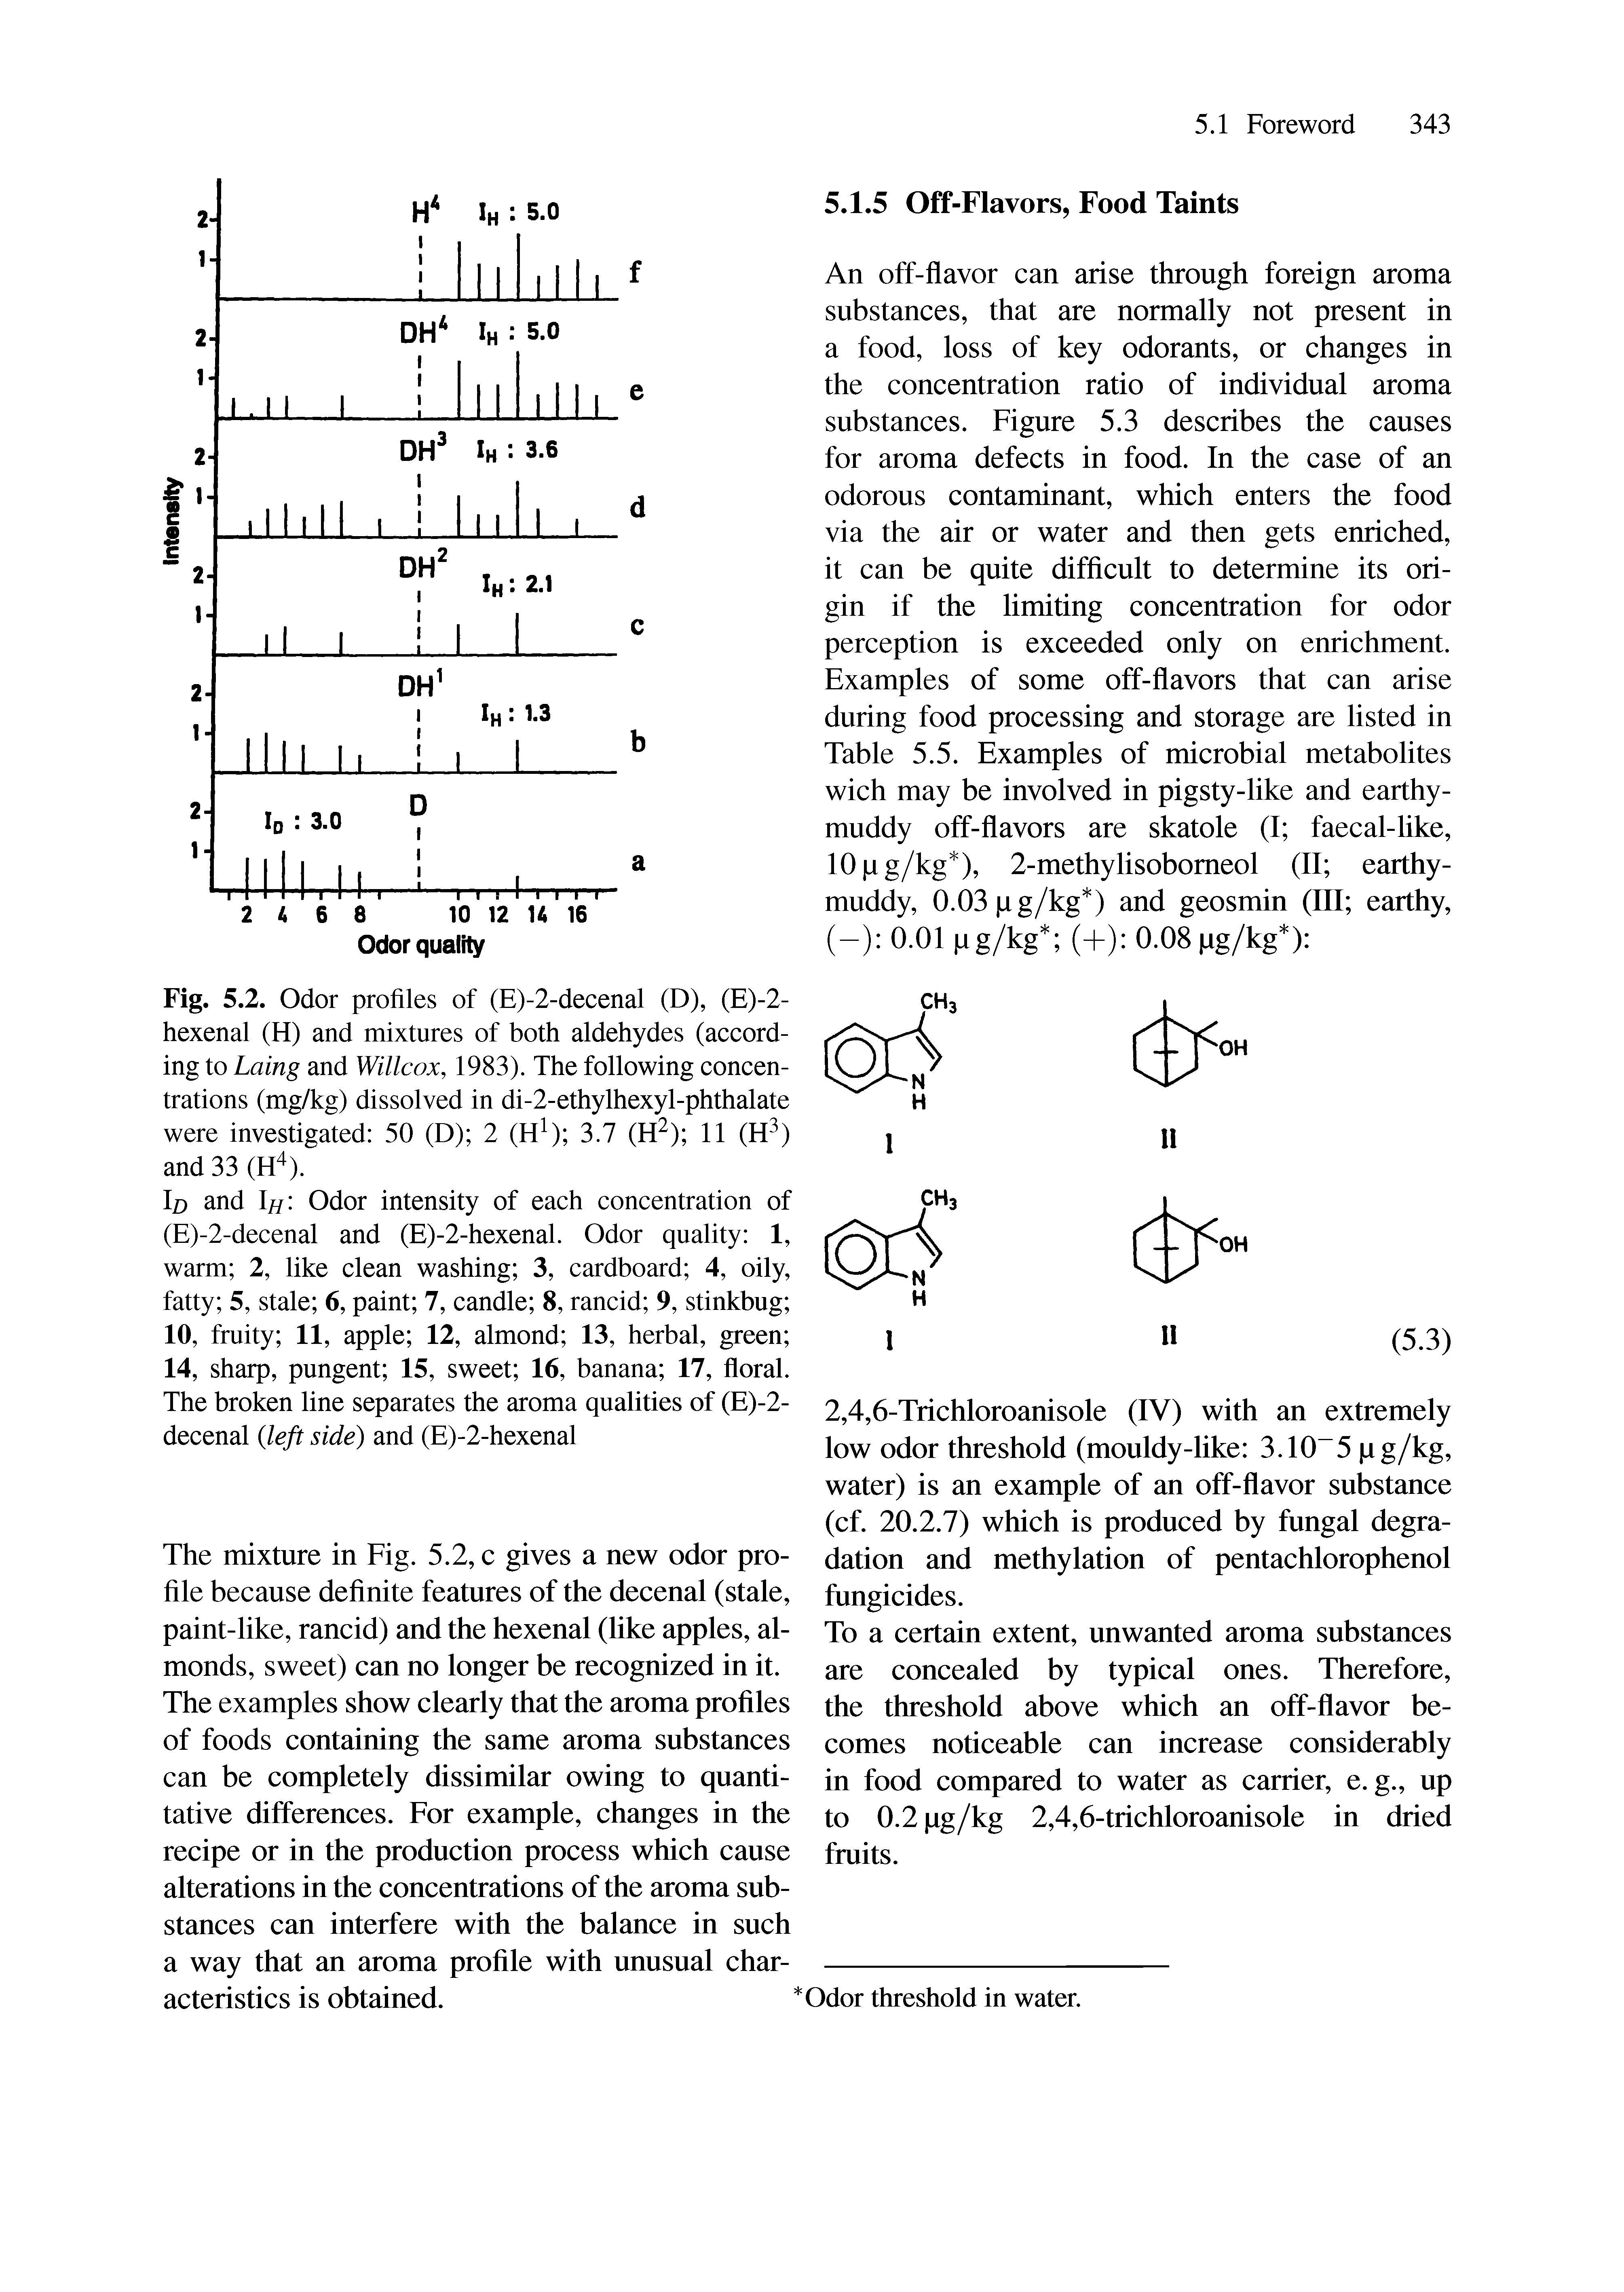 Fig. 5.2. Odor profiles of (E)-2-decenal (D), (E)-2-hexenal (H) and mixtures of both aldehydes (according to Laing and Willcox, 1983). The following concentrations (mg/kg) dissolved in di-2-ethylhexyl-phthalate were investigated 50 (D) 2 (H ) 3.7 (H ) 11 (H ) and 33...